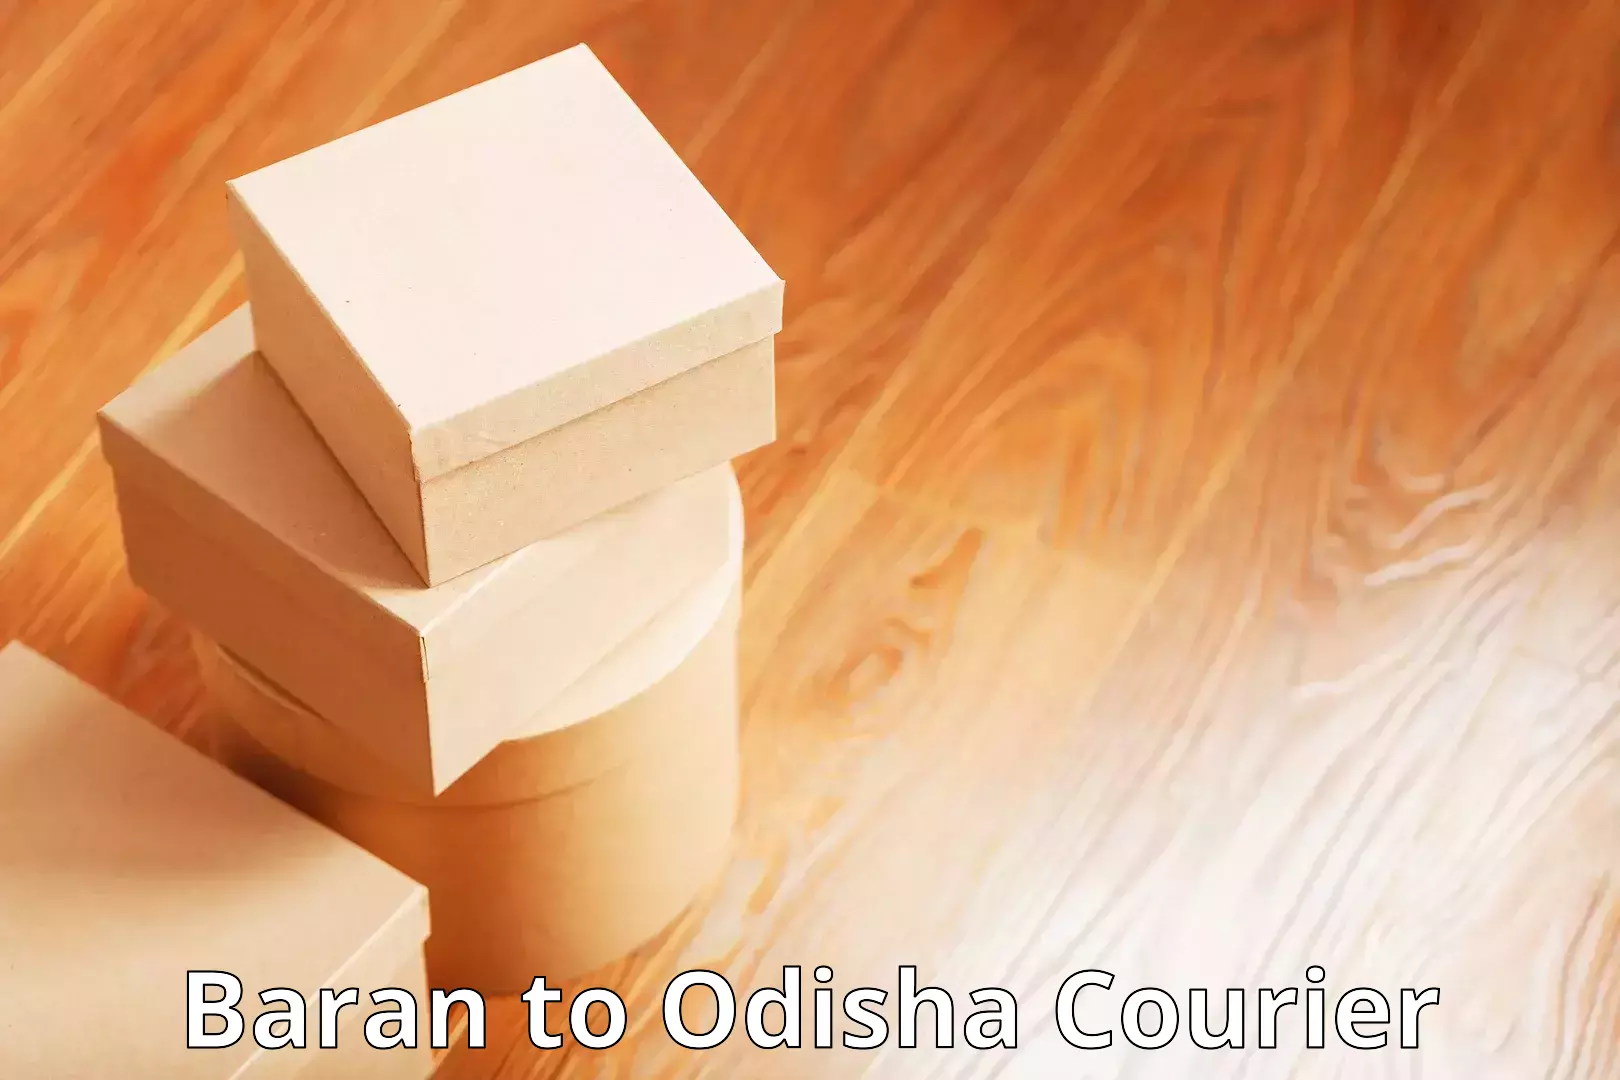 Next-day delivery options Baran to Odisha